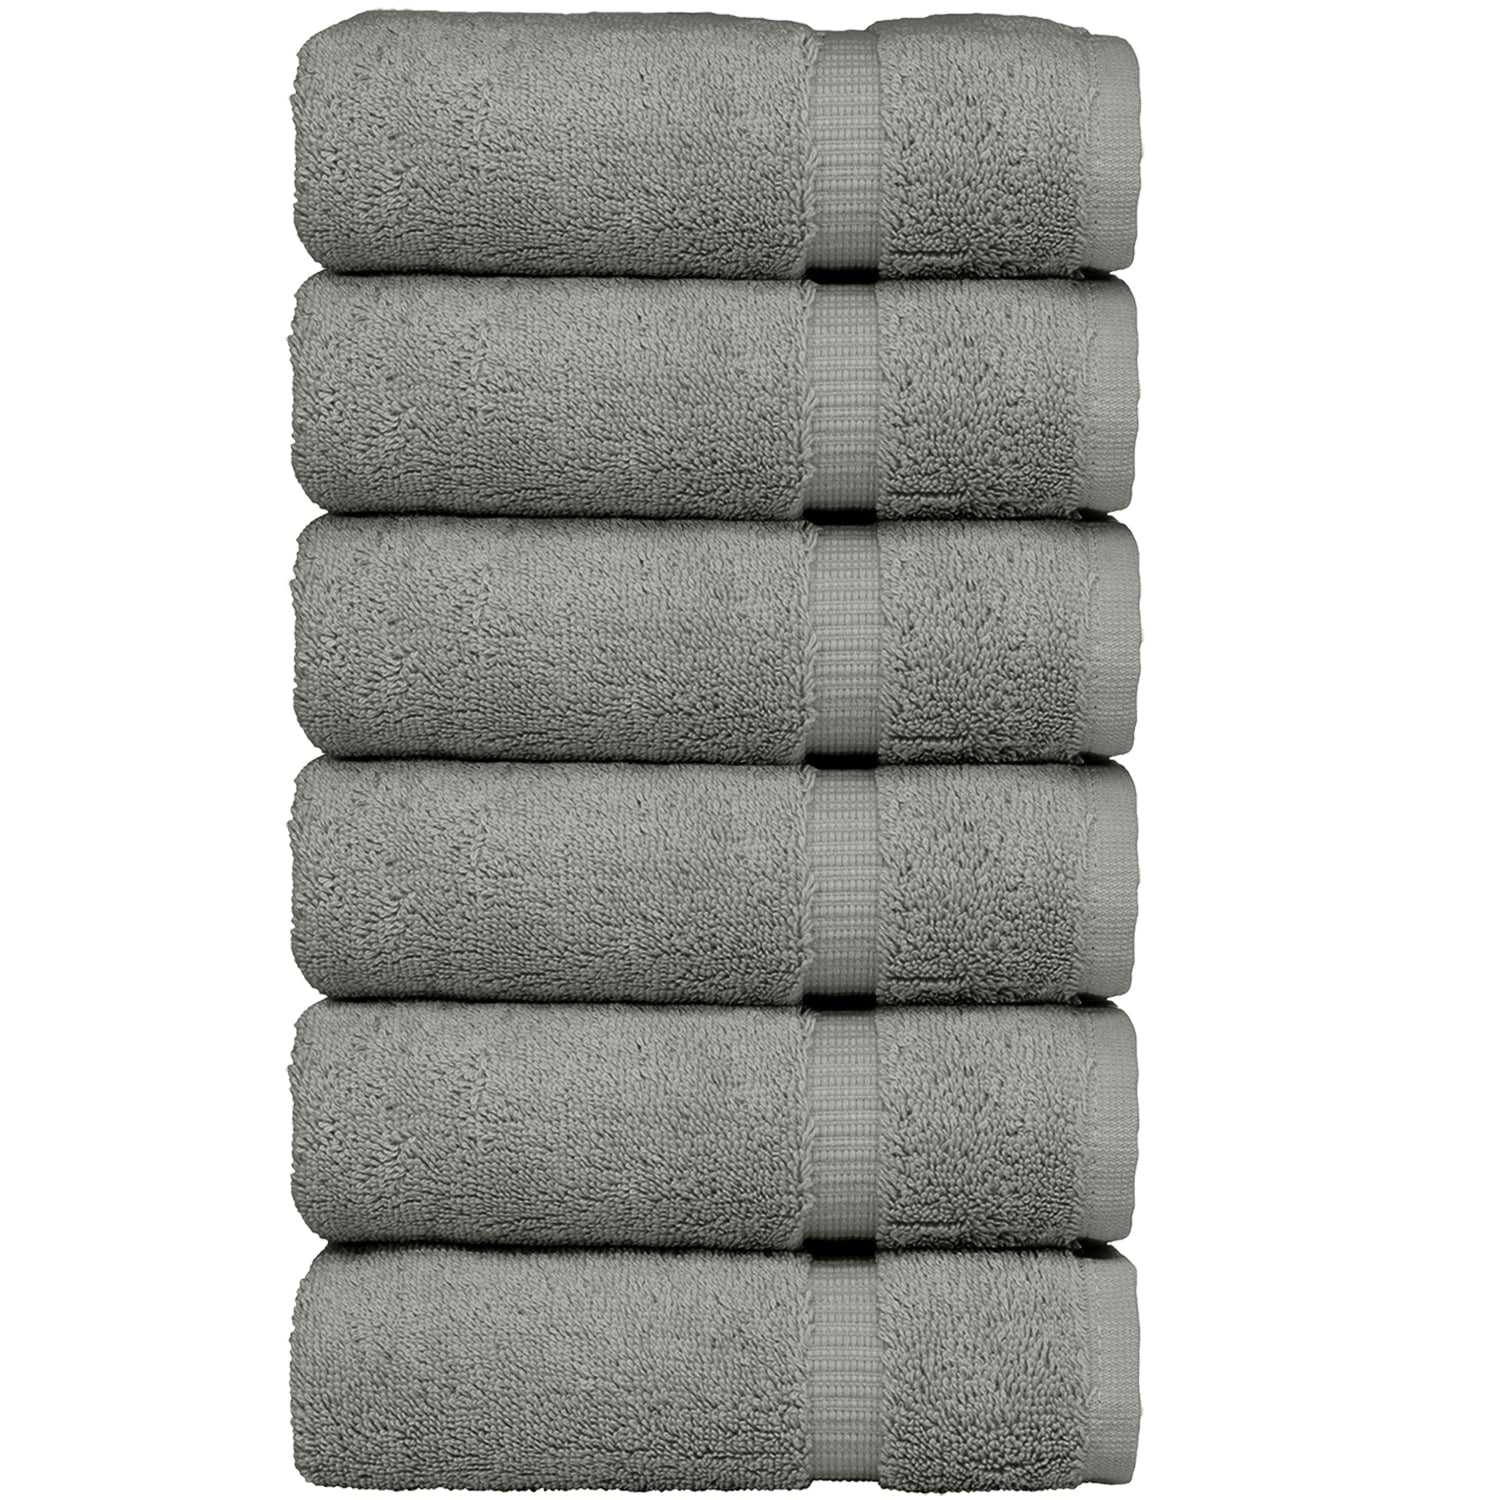 UGG 21259 Pasha Cotton 2-Piece Hand Towel Soft Fluffy Luxury Highly  Absorbent Spa-Like Hotel Luxurious Machine Washable Towels, Hand 28 x  16-inch